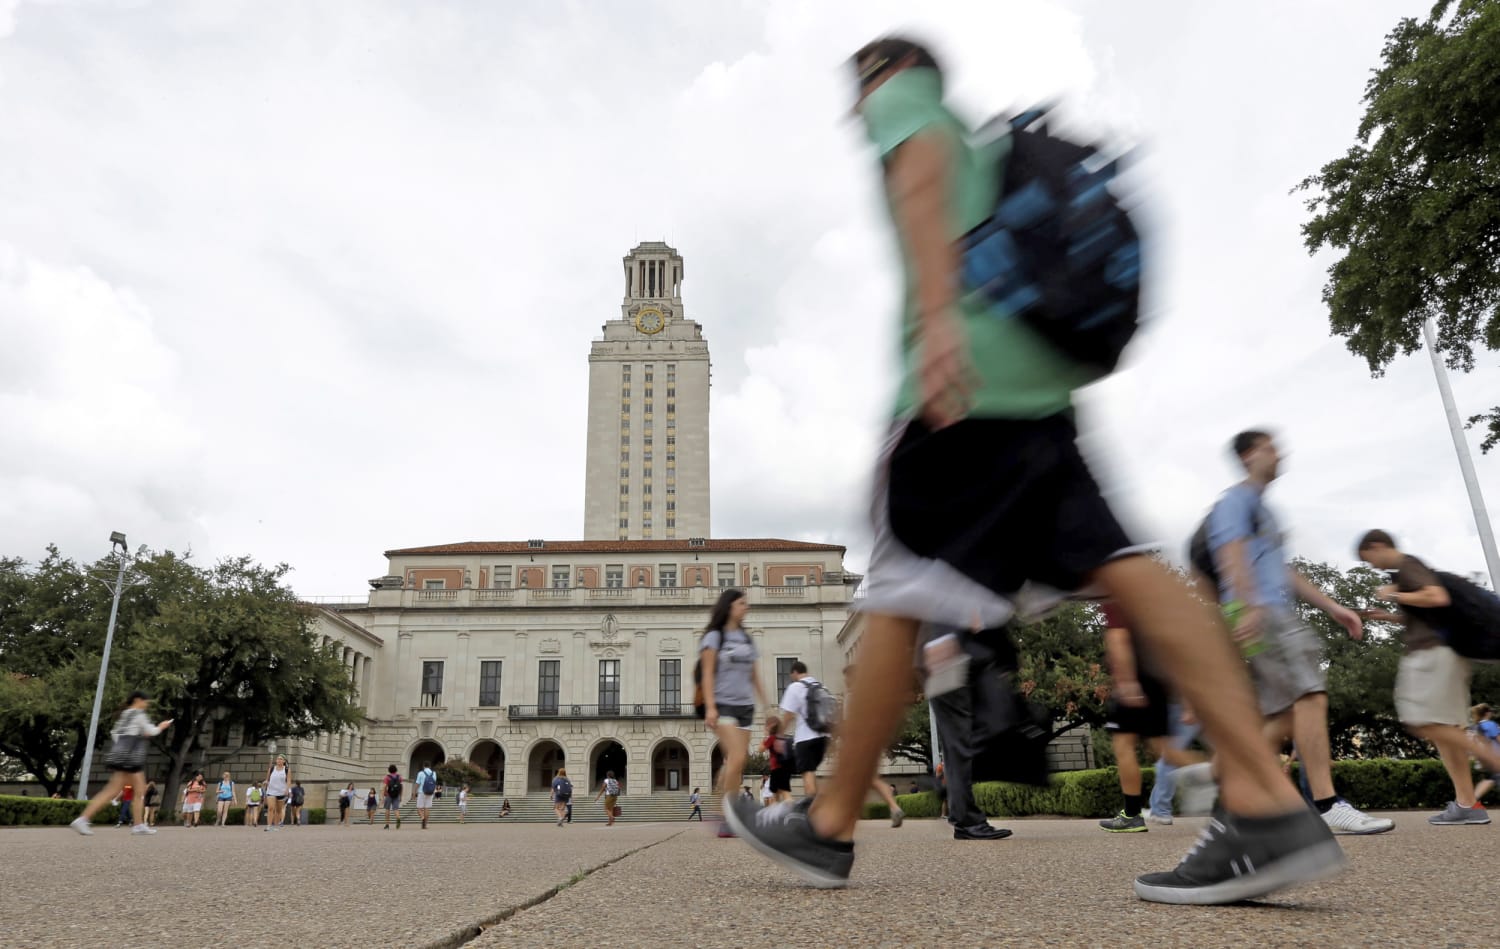 Texas players request action to make university more inclusive for